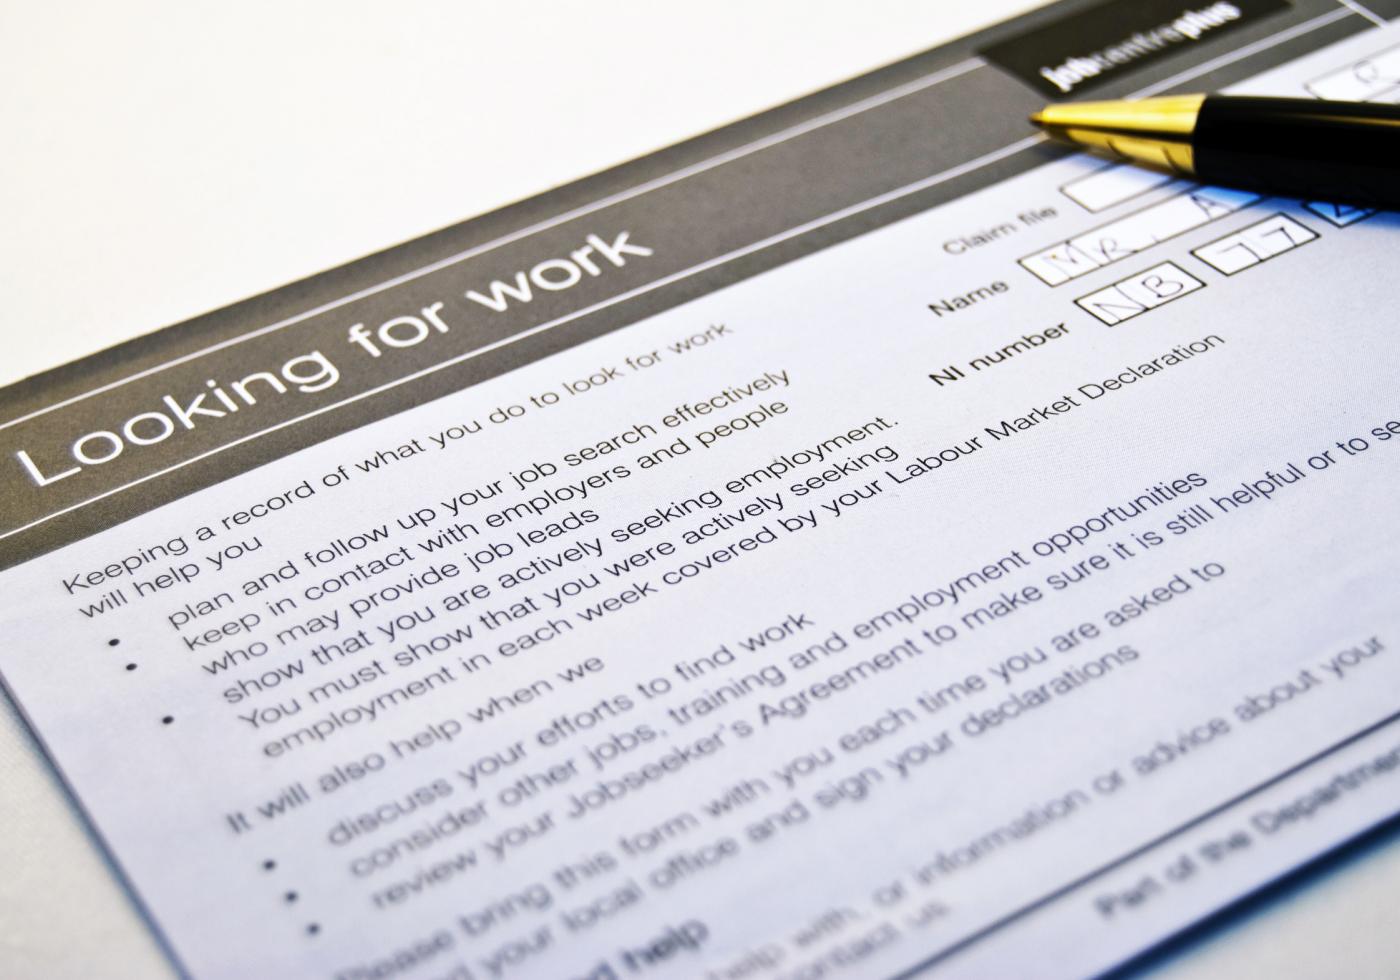 Rights, justice and economic wellbeing: Job forms